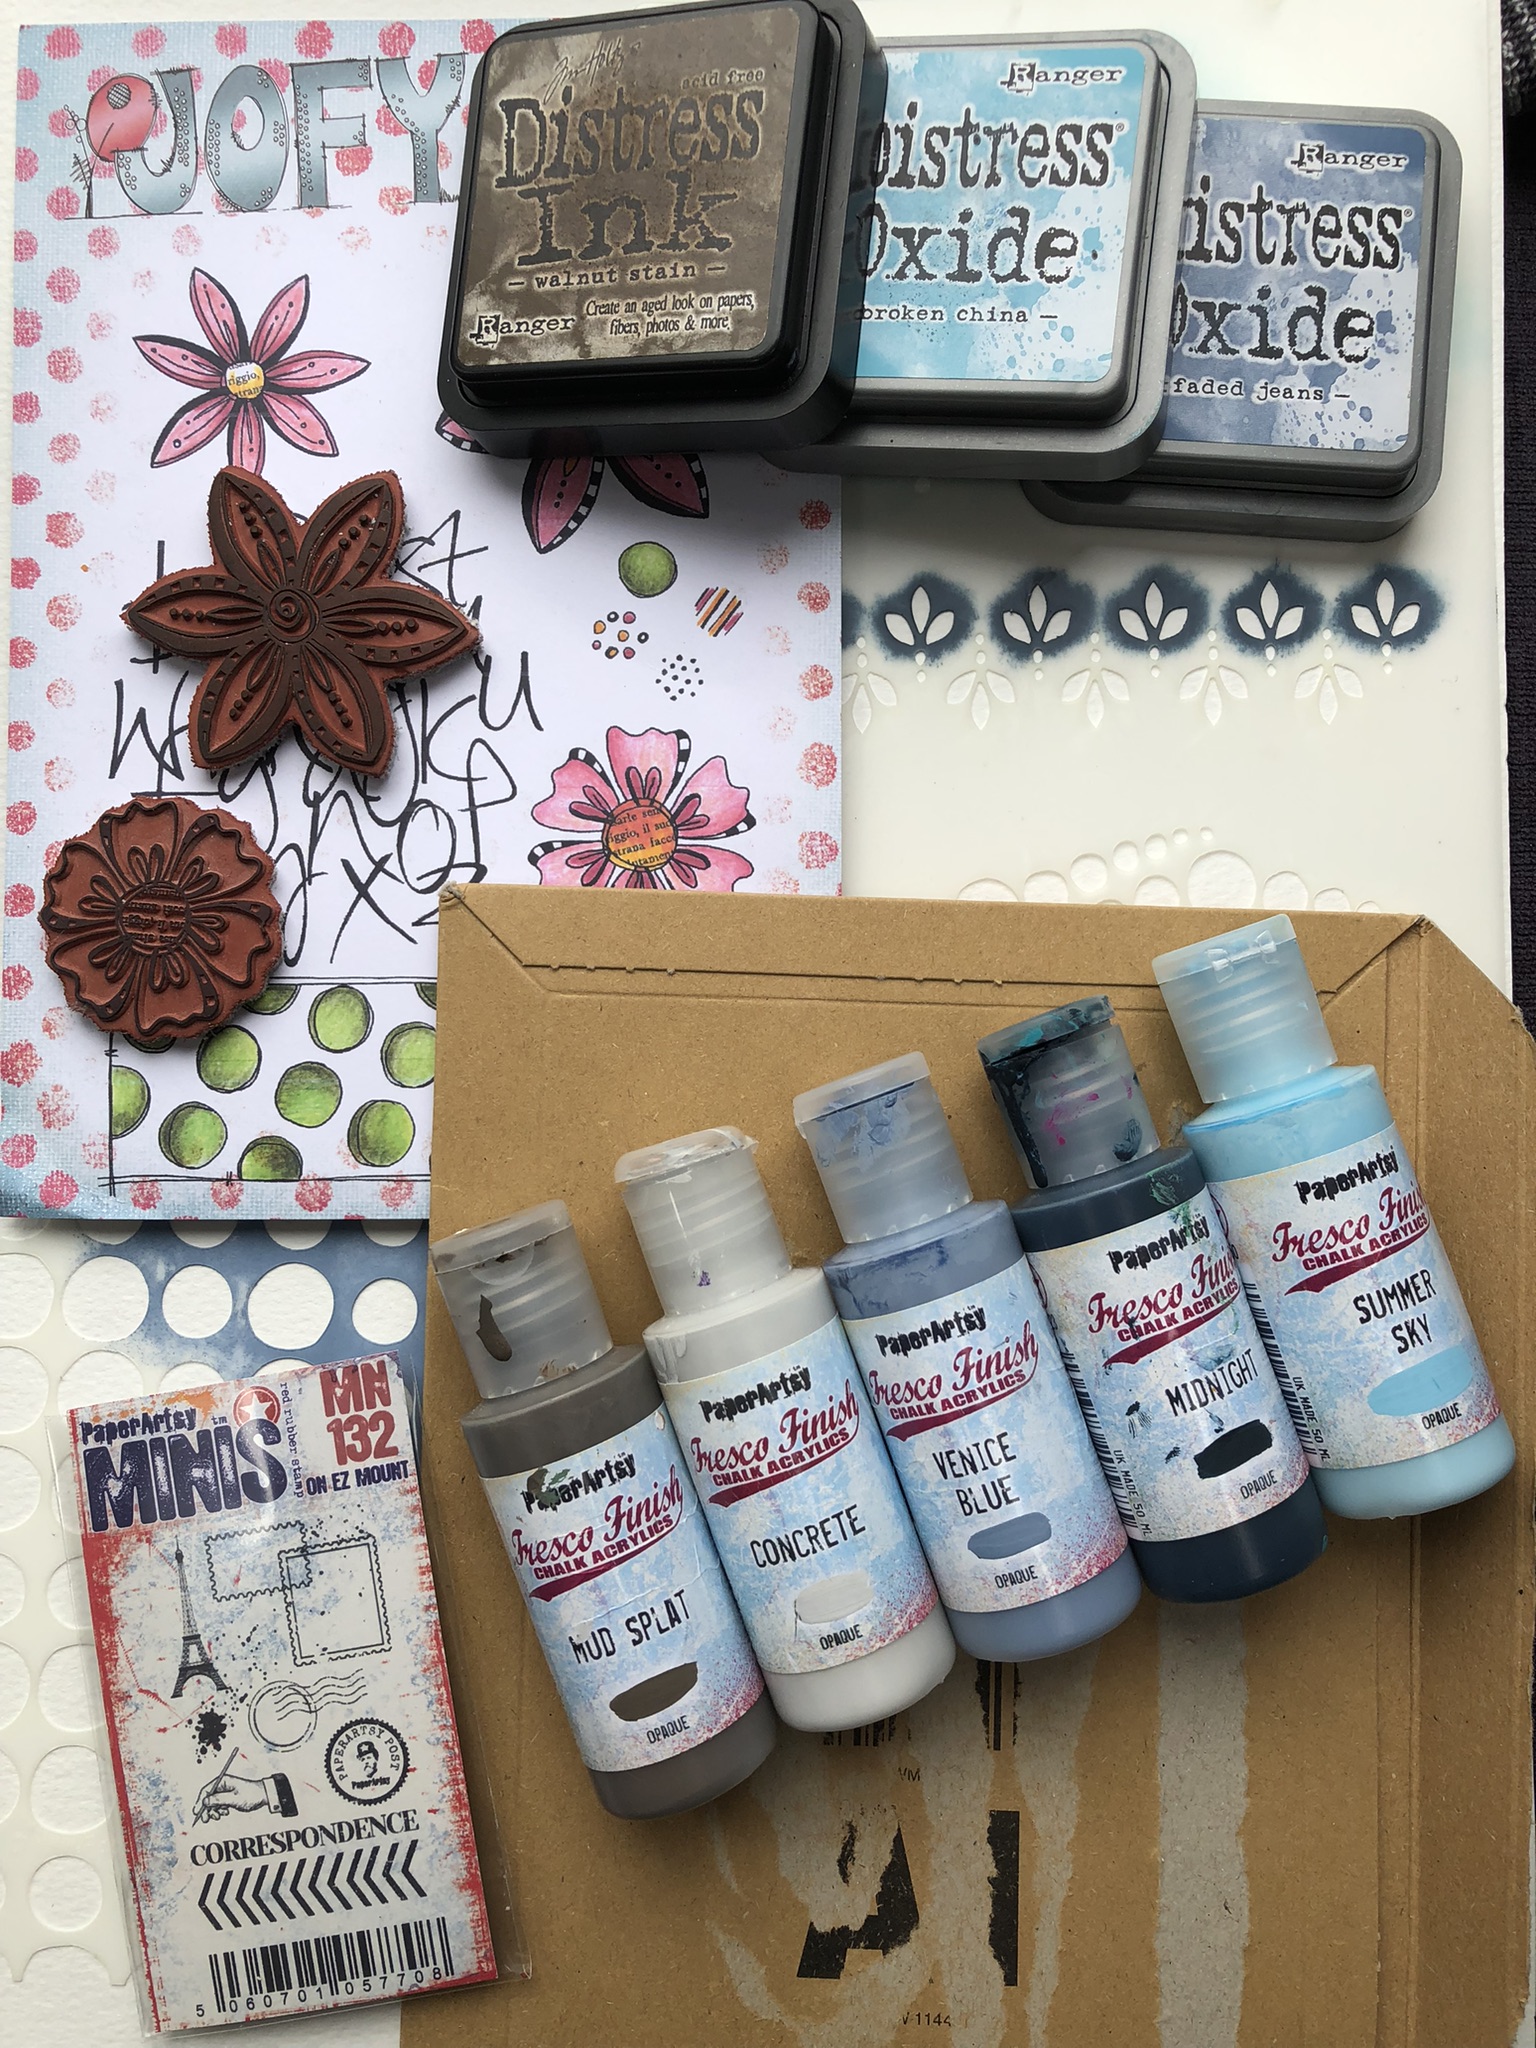 Distress Ink 101: The Many Uses of Distress Ink 